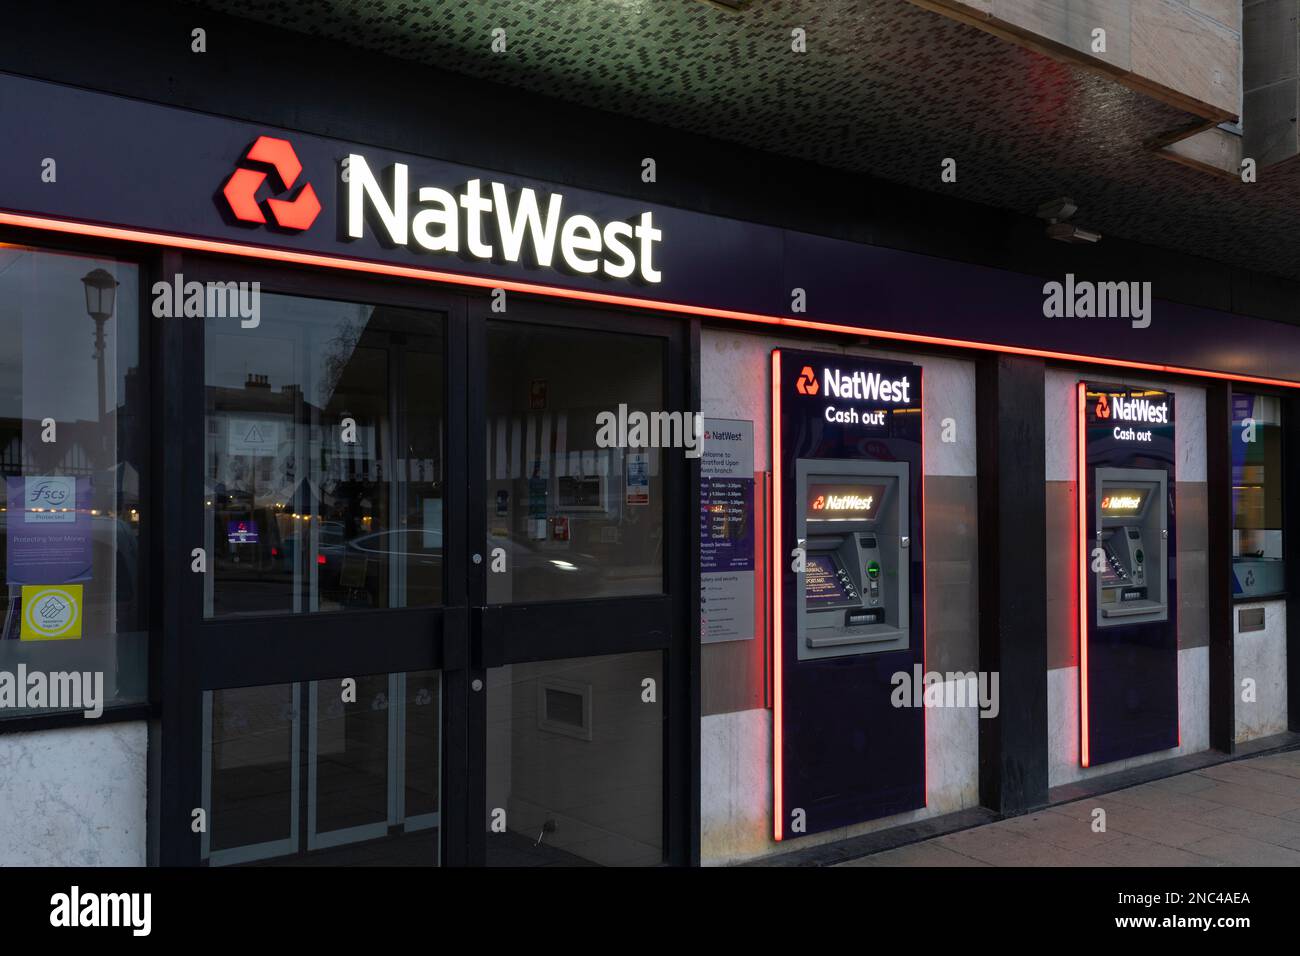 Natwest bank logo and title and cash machines on the exterior of a high street branch in Stratford upon Avon, UK. Concept: UK banking industry Stock Photo